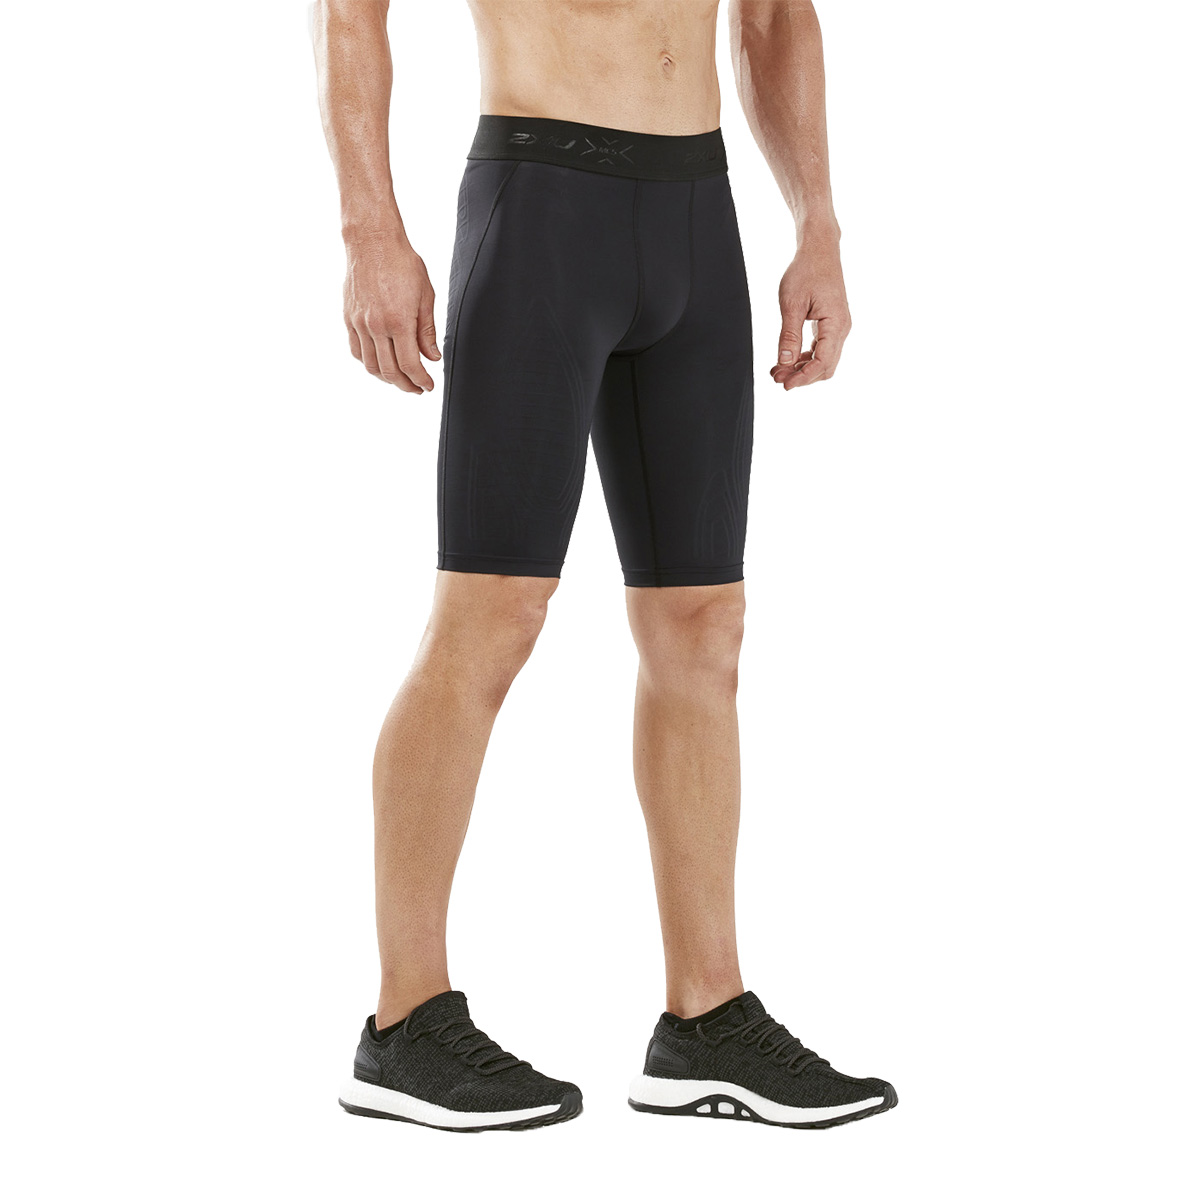 2XU MCS X-Training Compression Short, , large image number null